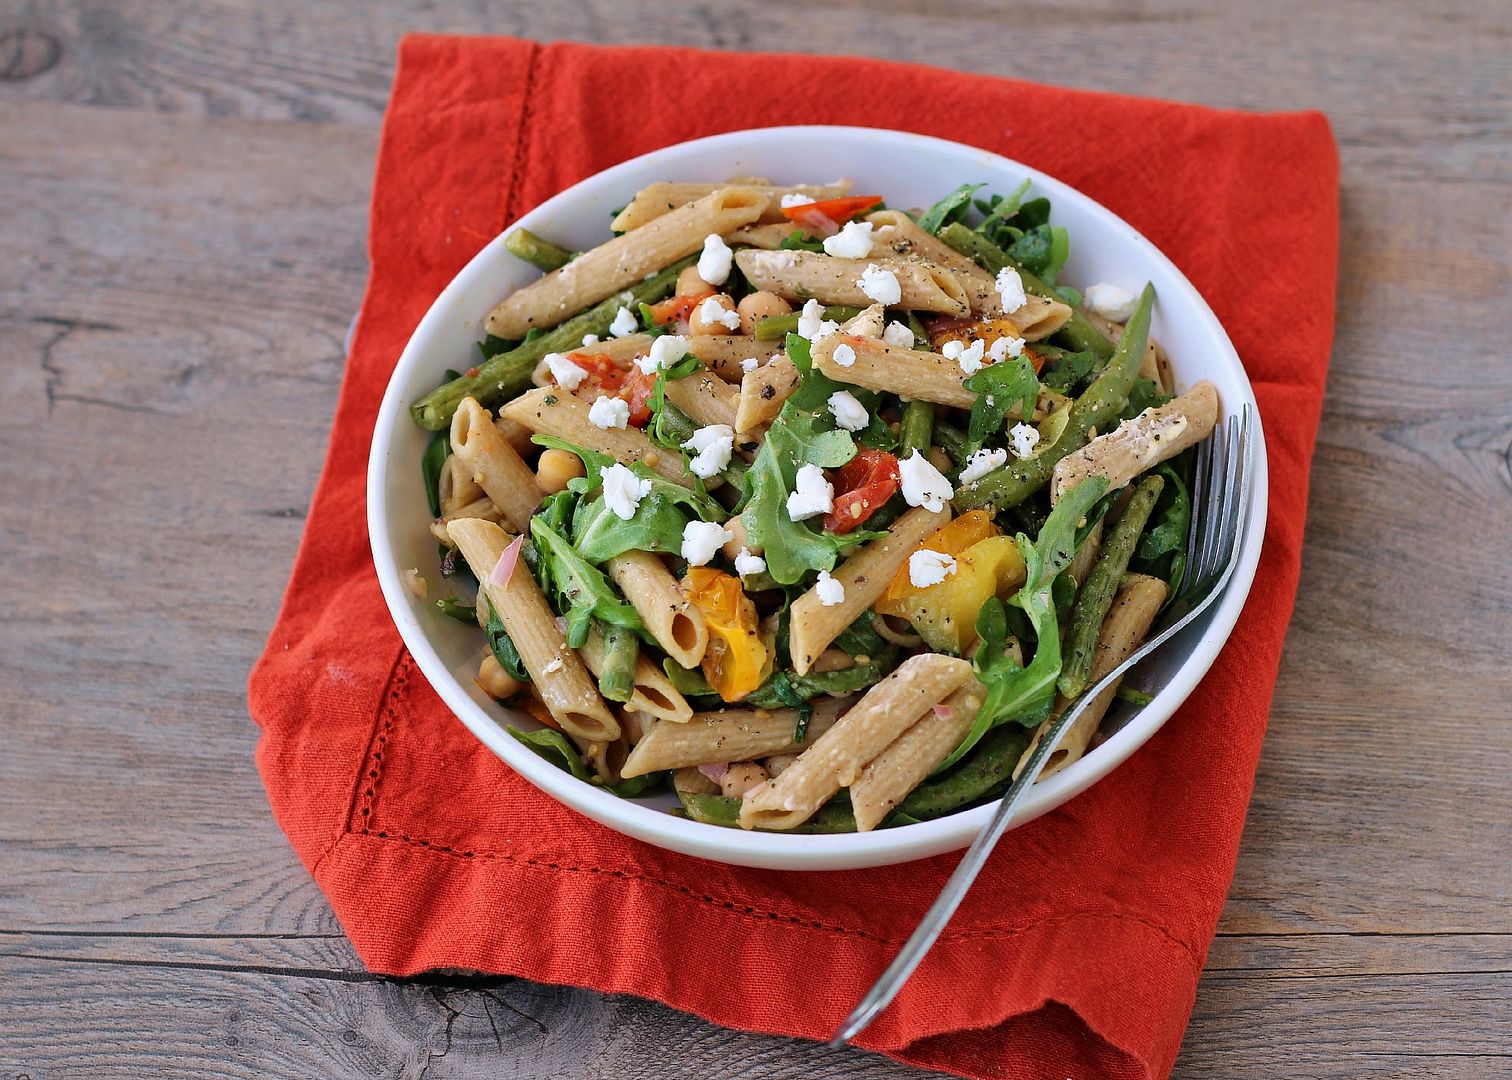 Arugula Pasta Salad with Goat Cheese, Olives, Chickpeas, and Roasted Veggies